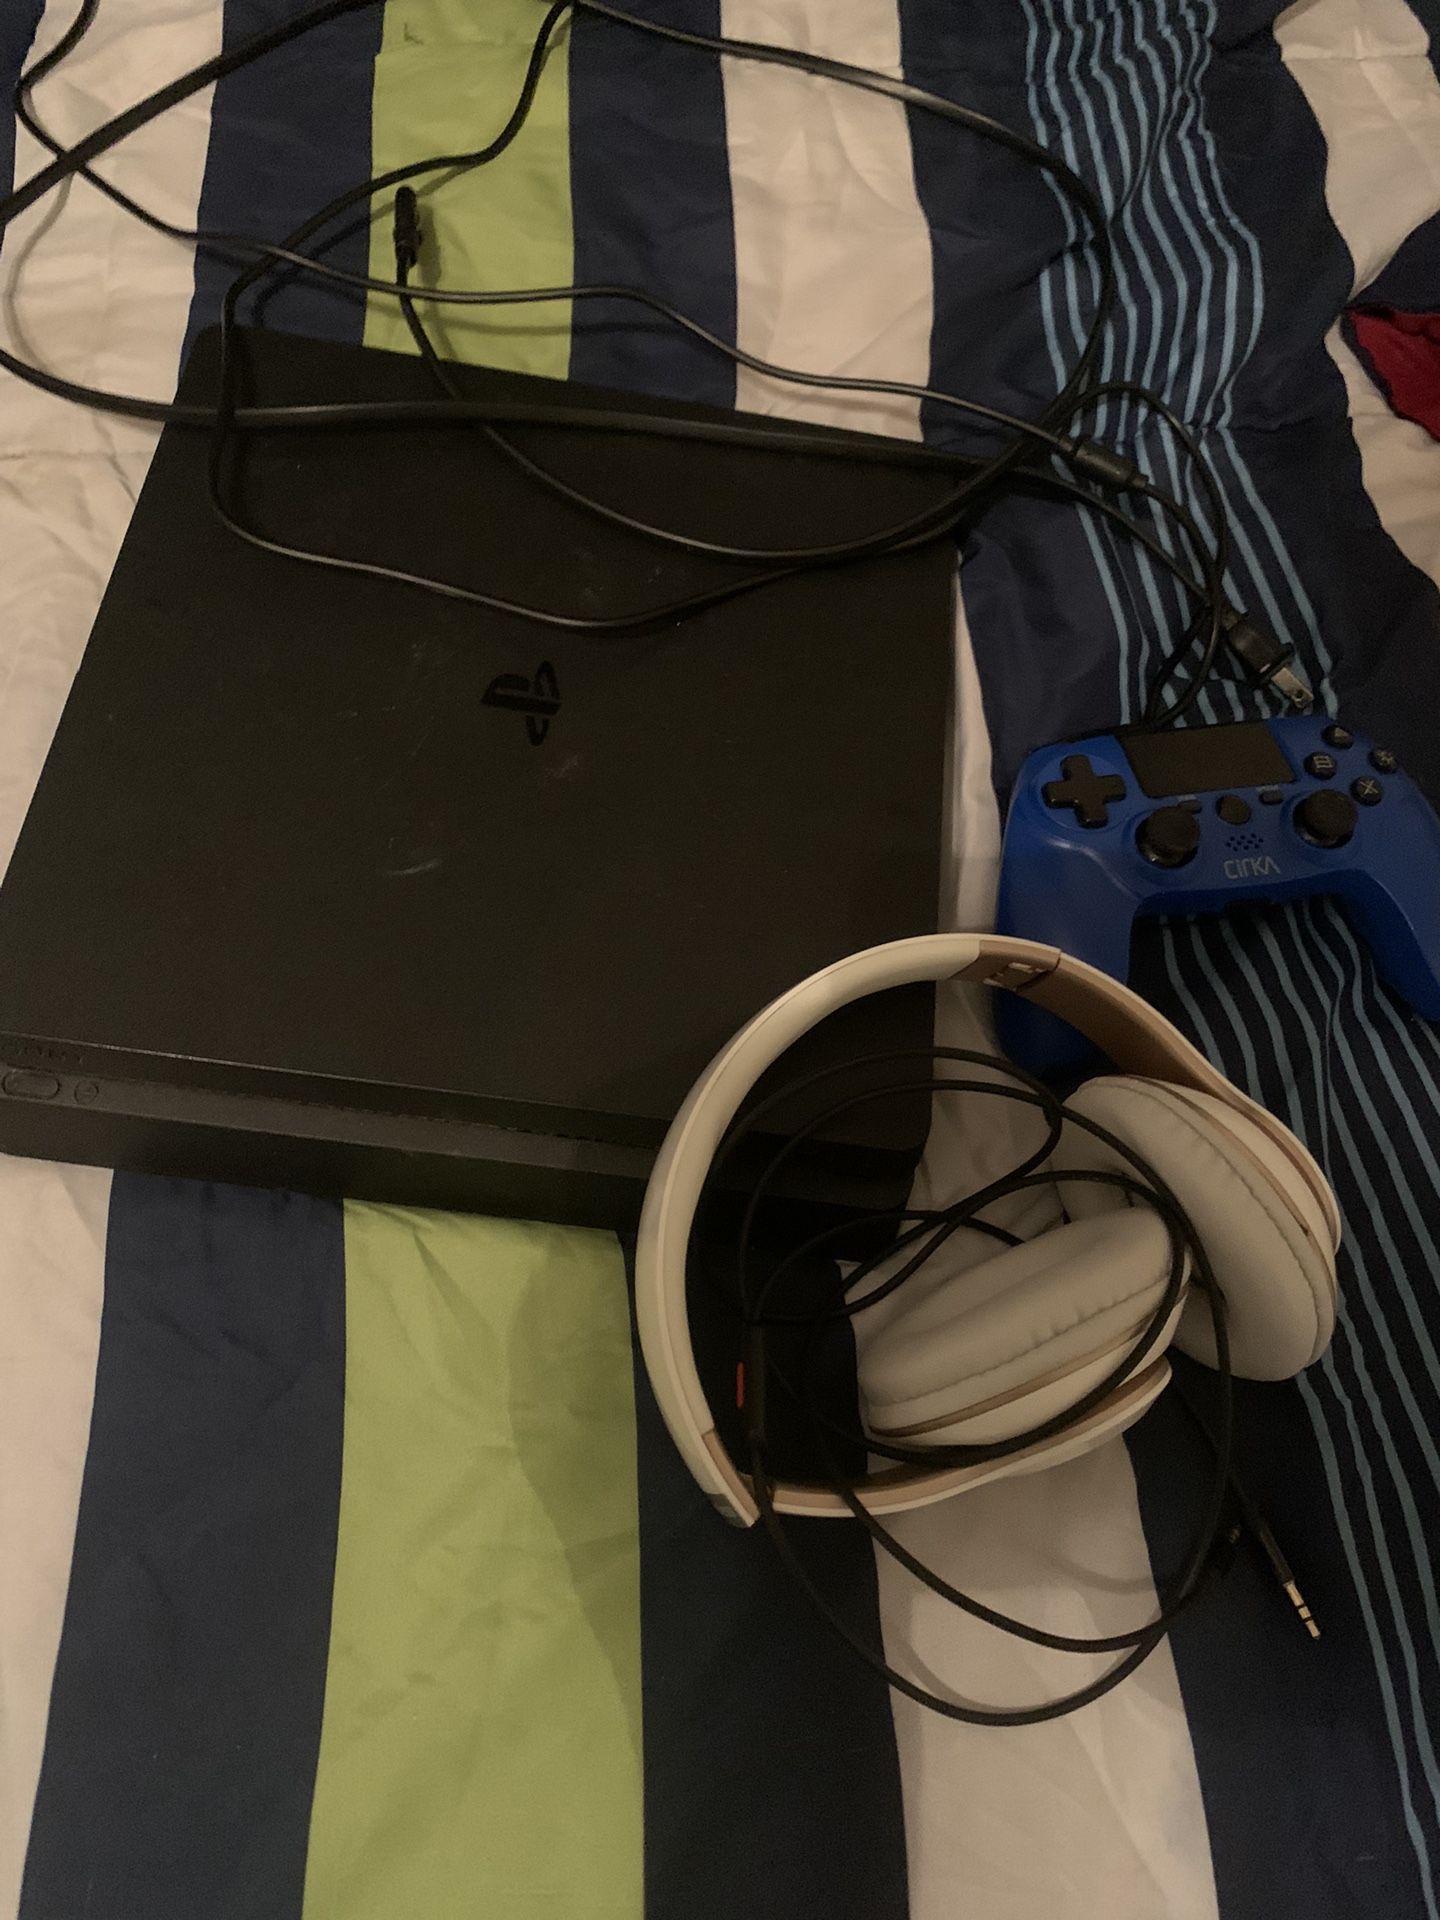 Headset PS4 Slim And Controller 